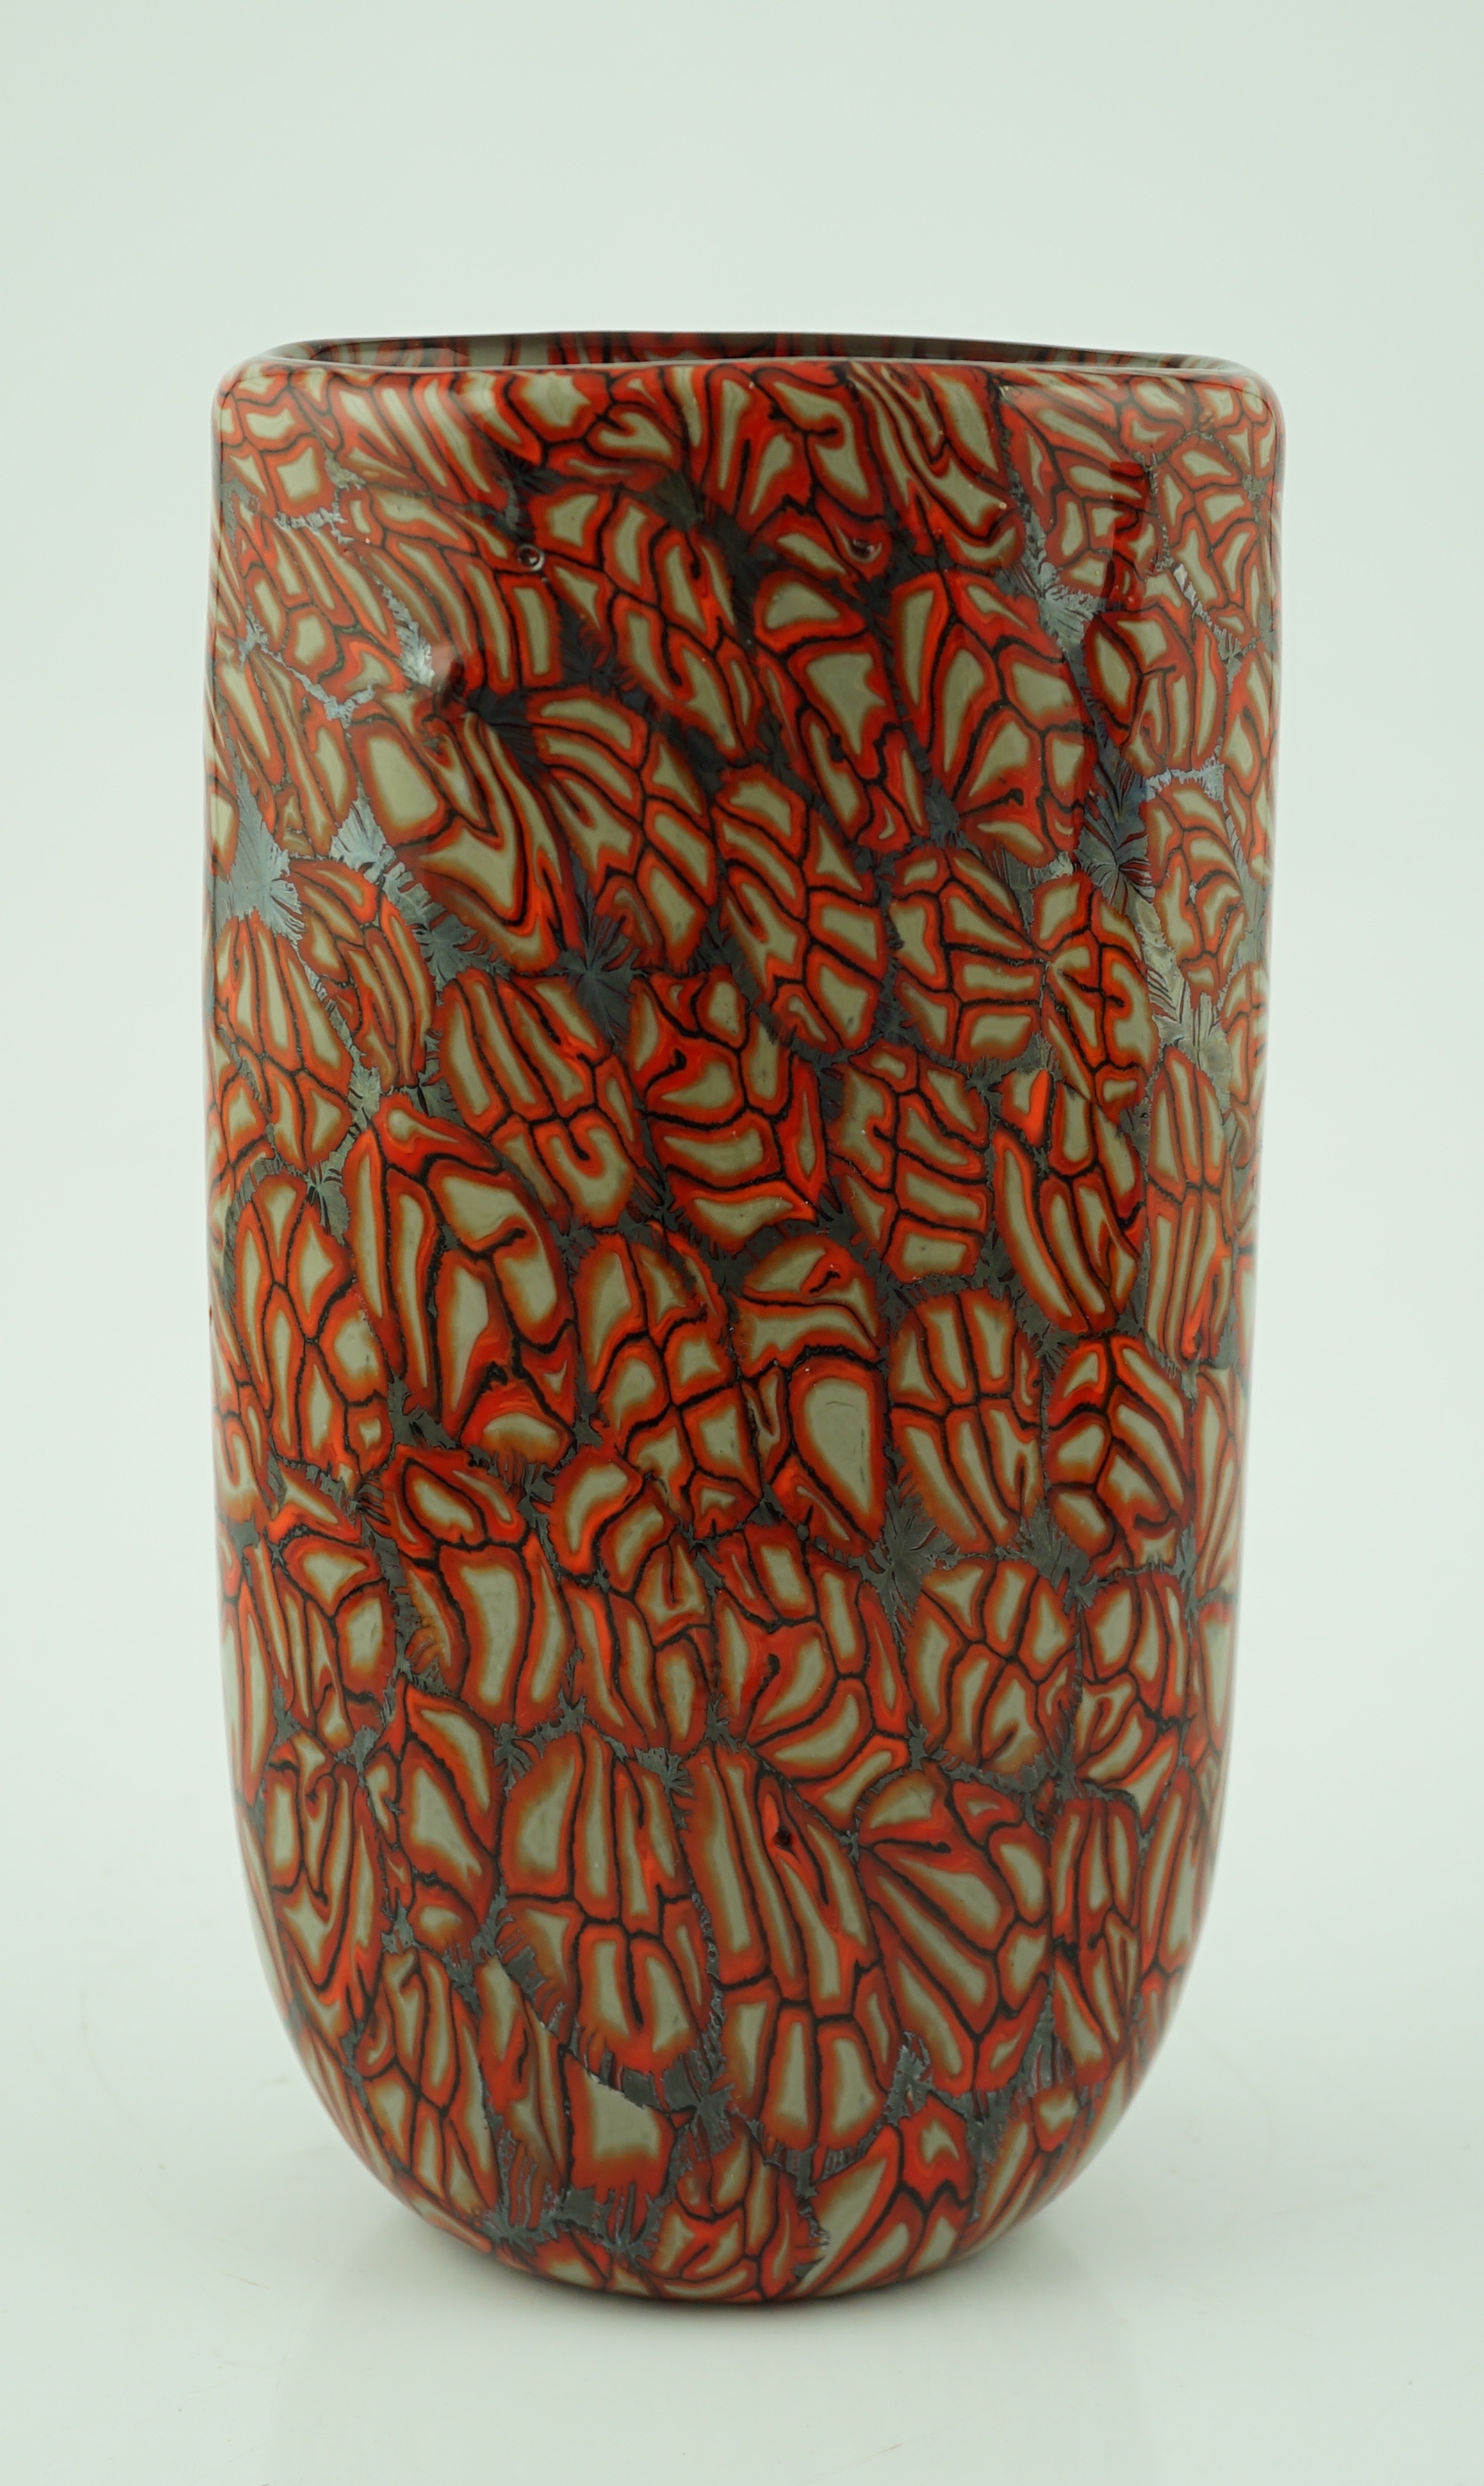 Vittorio Ferro (1932-2012 A Murano glass Murrine vase, cup shaped decorated with red and white stylised flowers, on a black ground, signed, 28.5cm, Please note this lot attracts an additional import tax of 20% on the ham